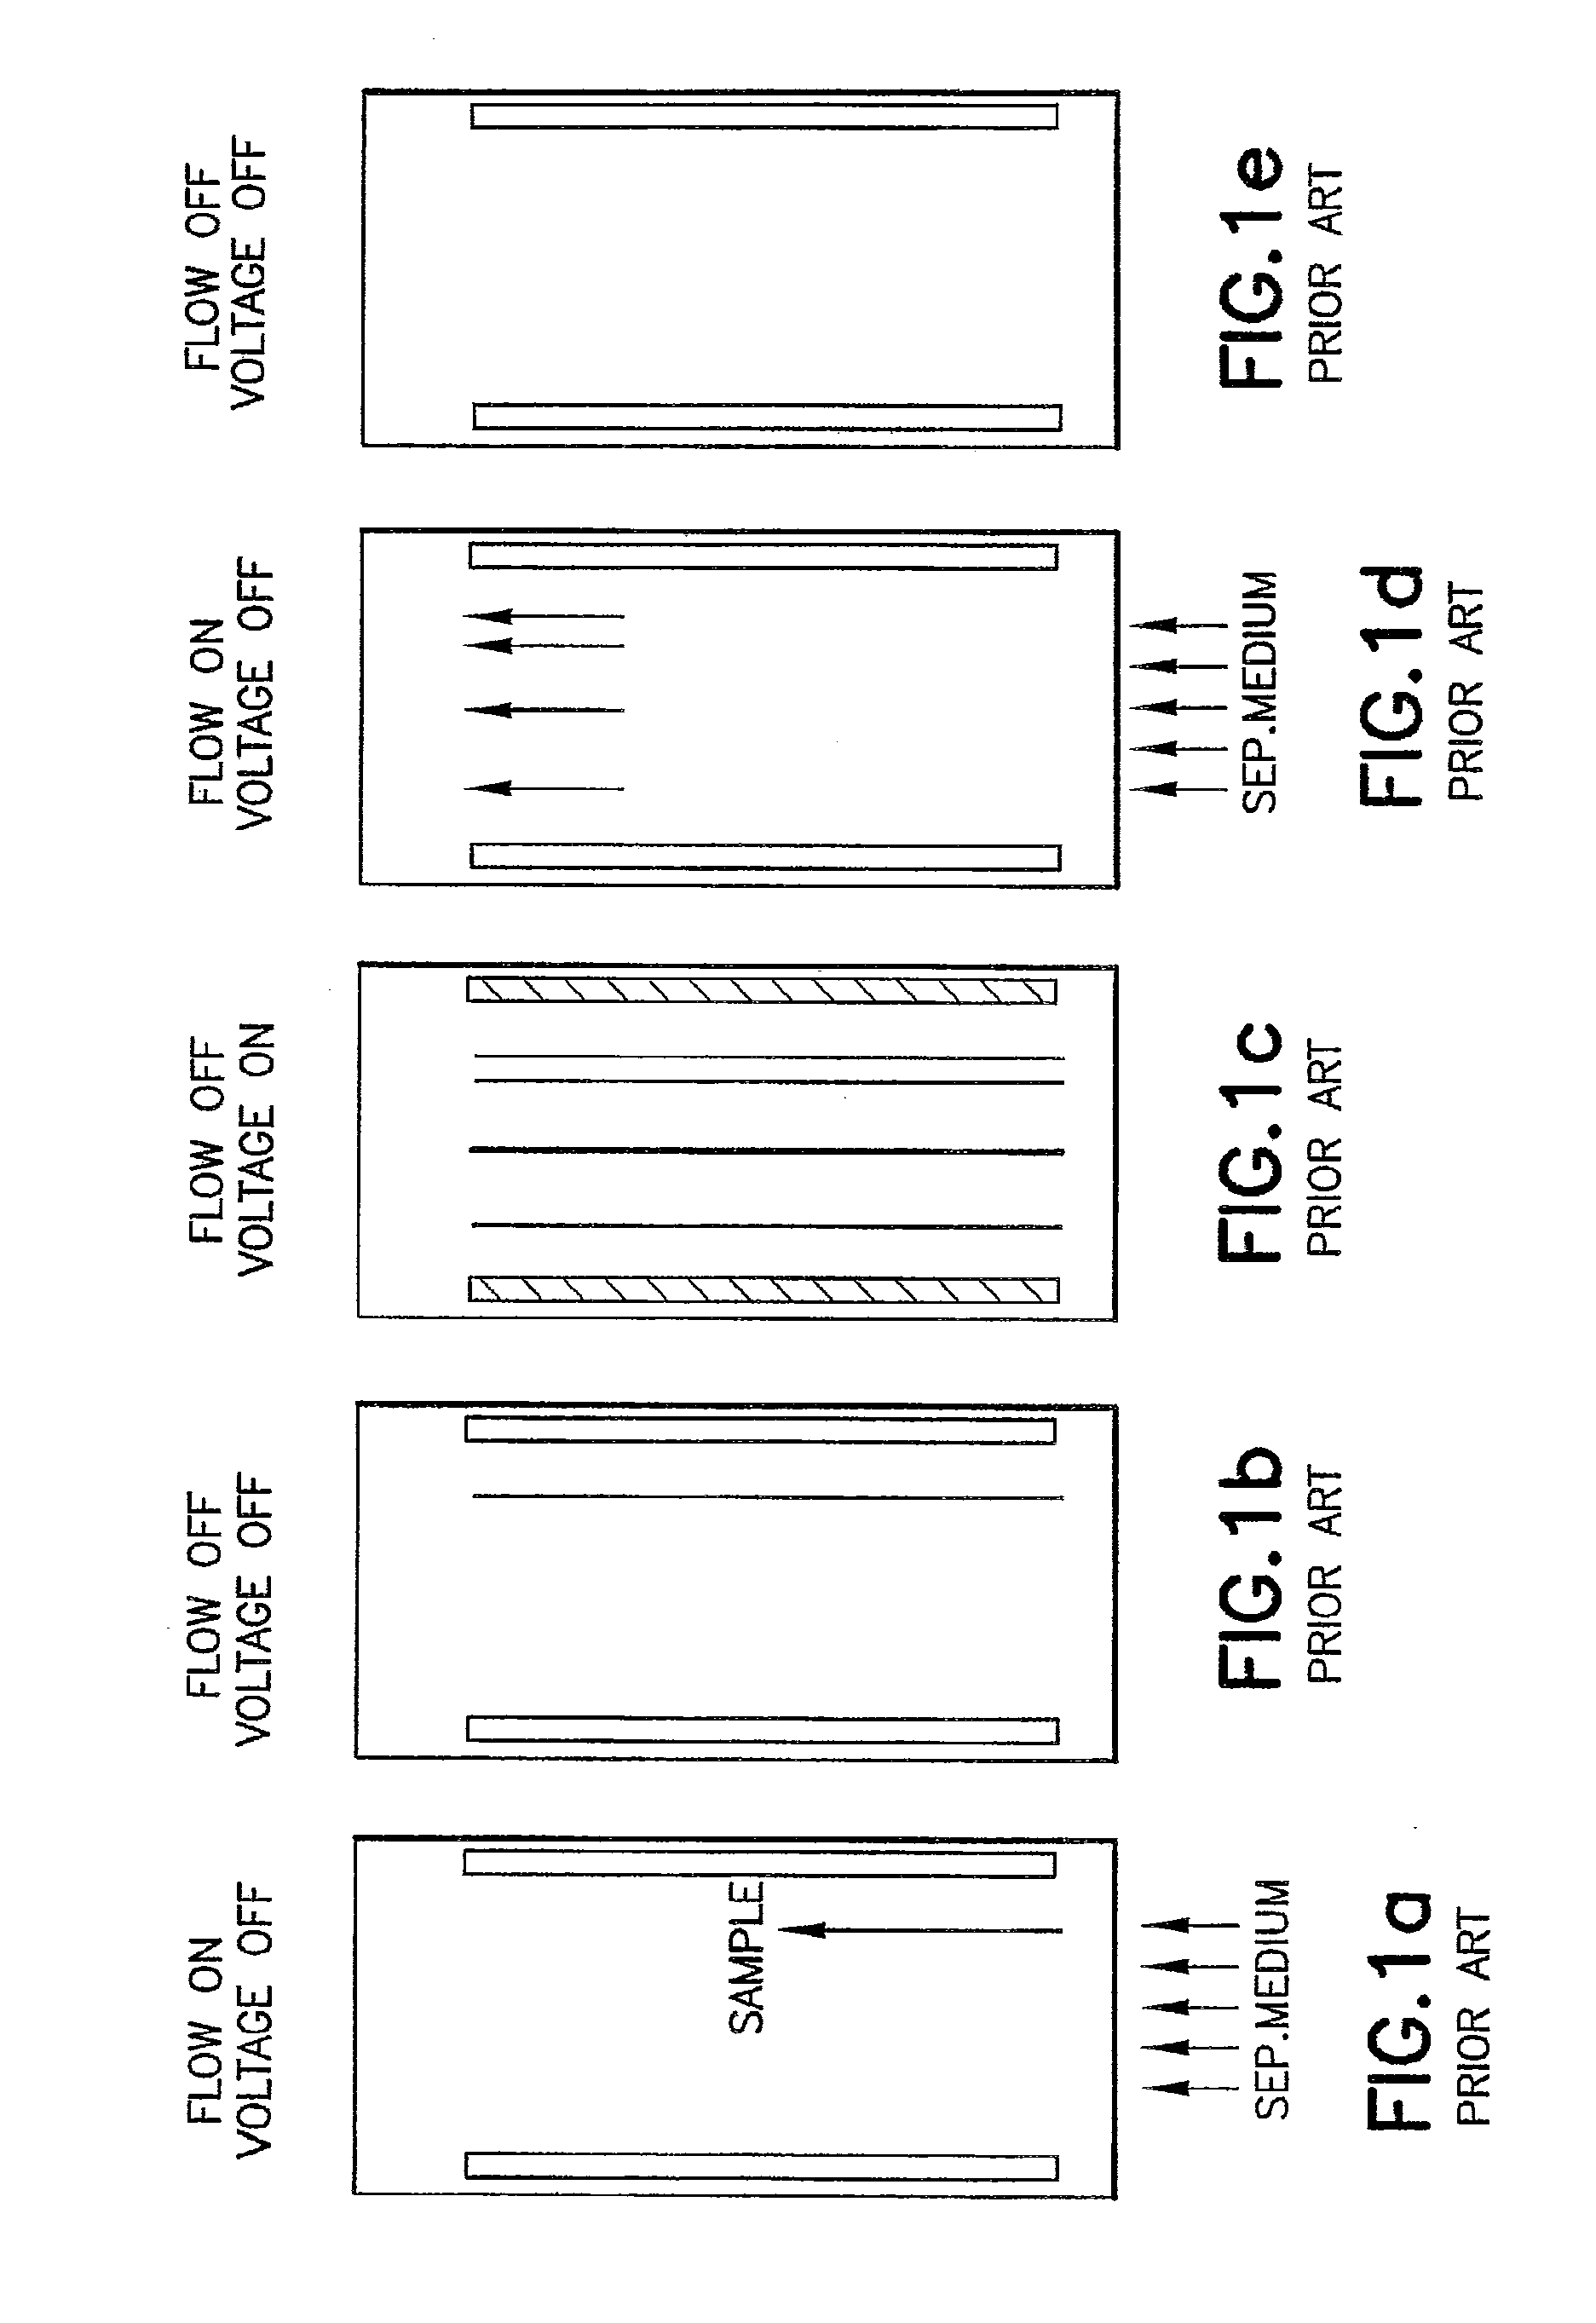 Methods and Apparatus for Carrier-Free Deflection Electrophoresis